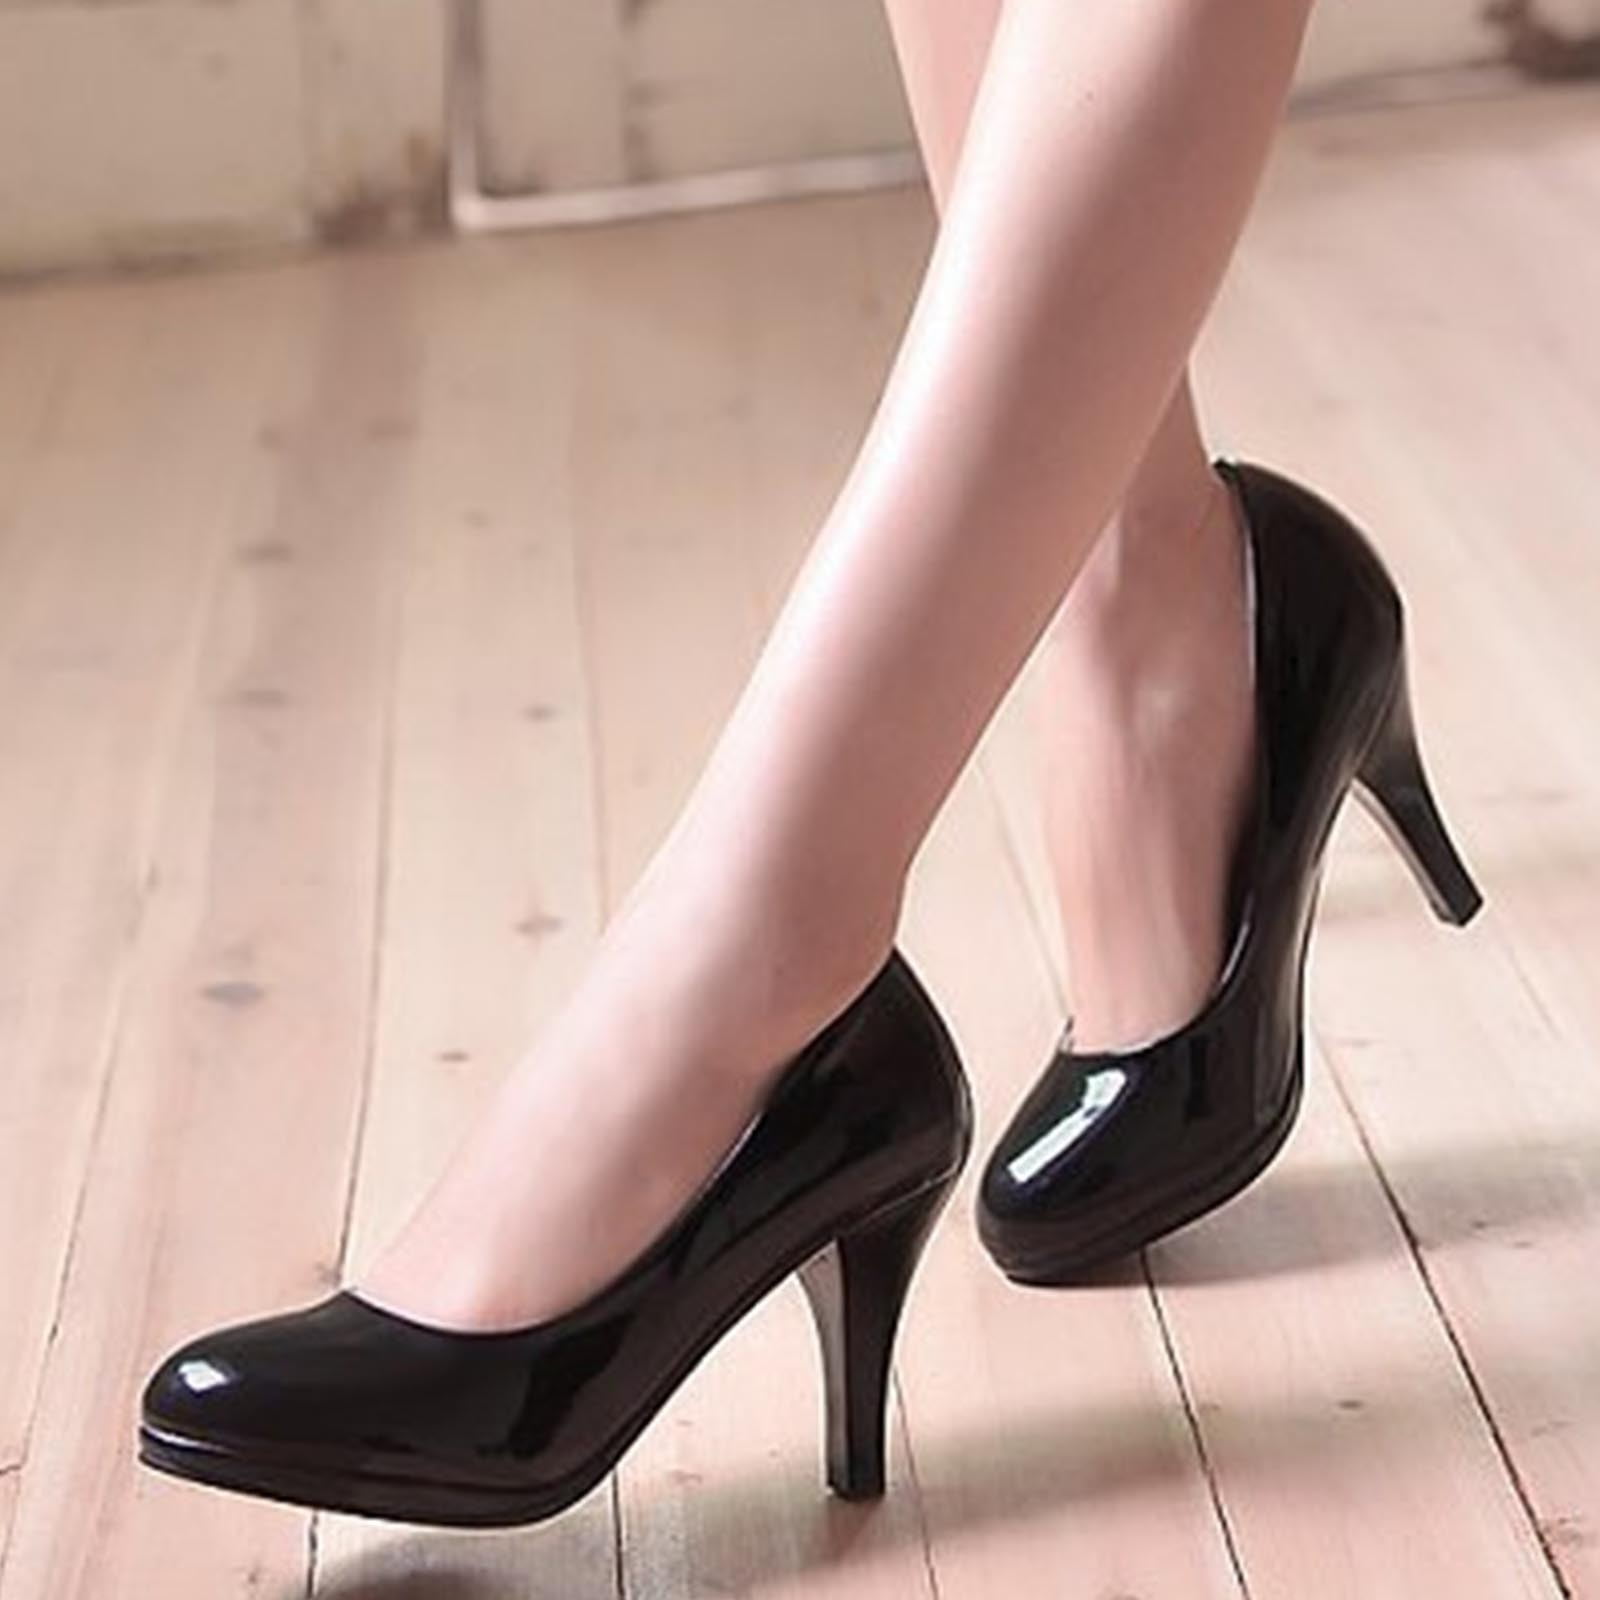 Sanbonepd Pumps Fashion Spring And Women Pumps Shoes Professional Heeled Shoes Patent Leather Shallow Mouth Work Shoes - Walmart.com